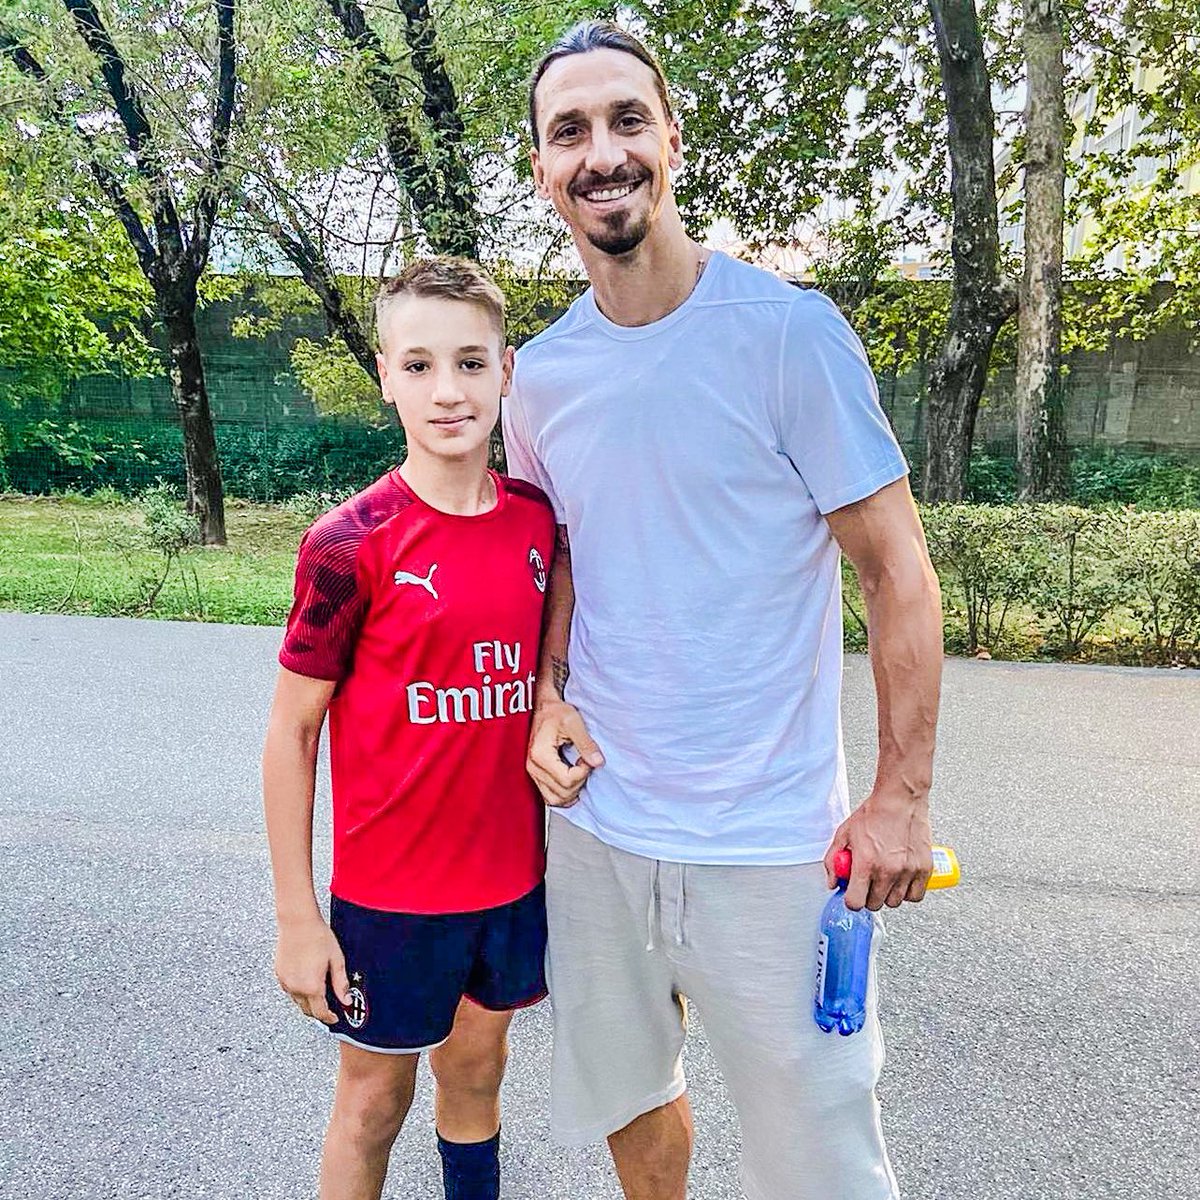 Francesco carmada with zlatan Ibrahimovic some years back. 

The future of AC MILAN is in a safe hand 🤭